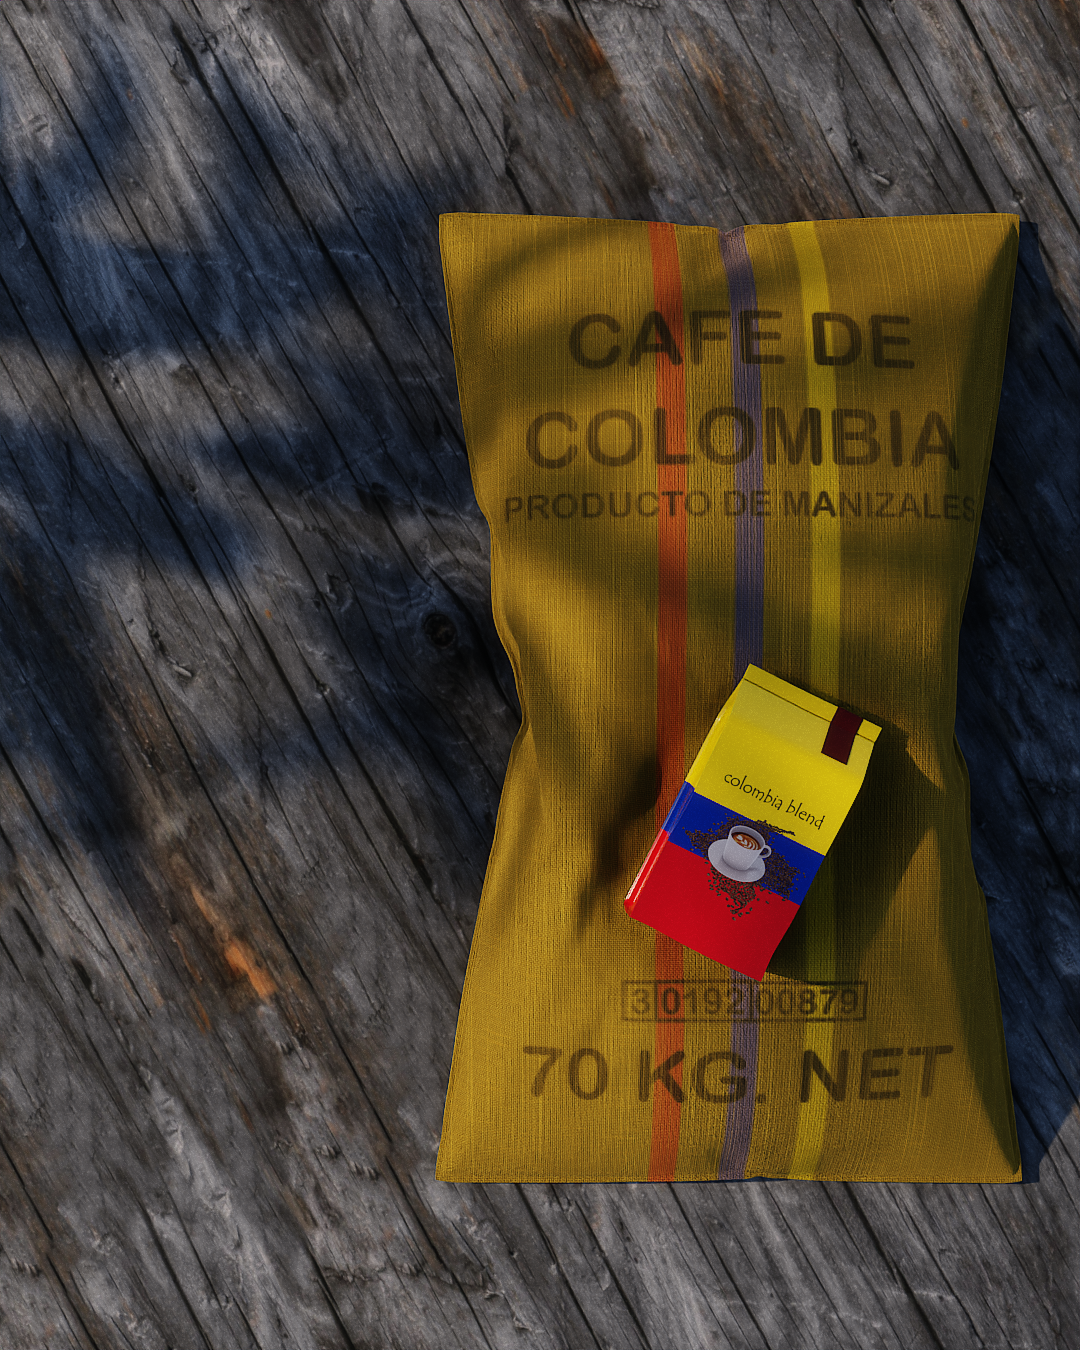 This is an example of a coffee related product image to show how realistic cgi product photography can appear.